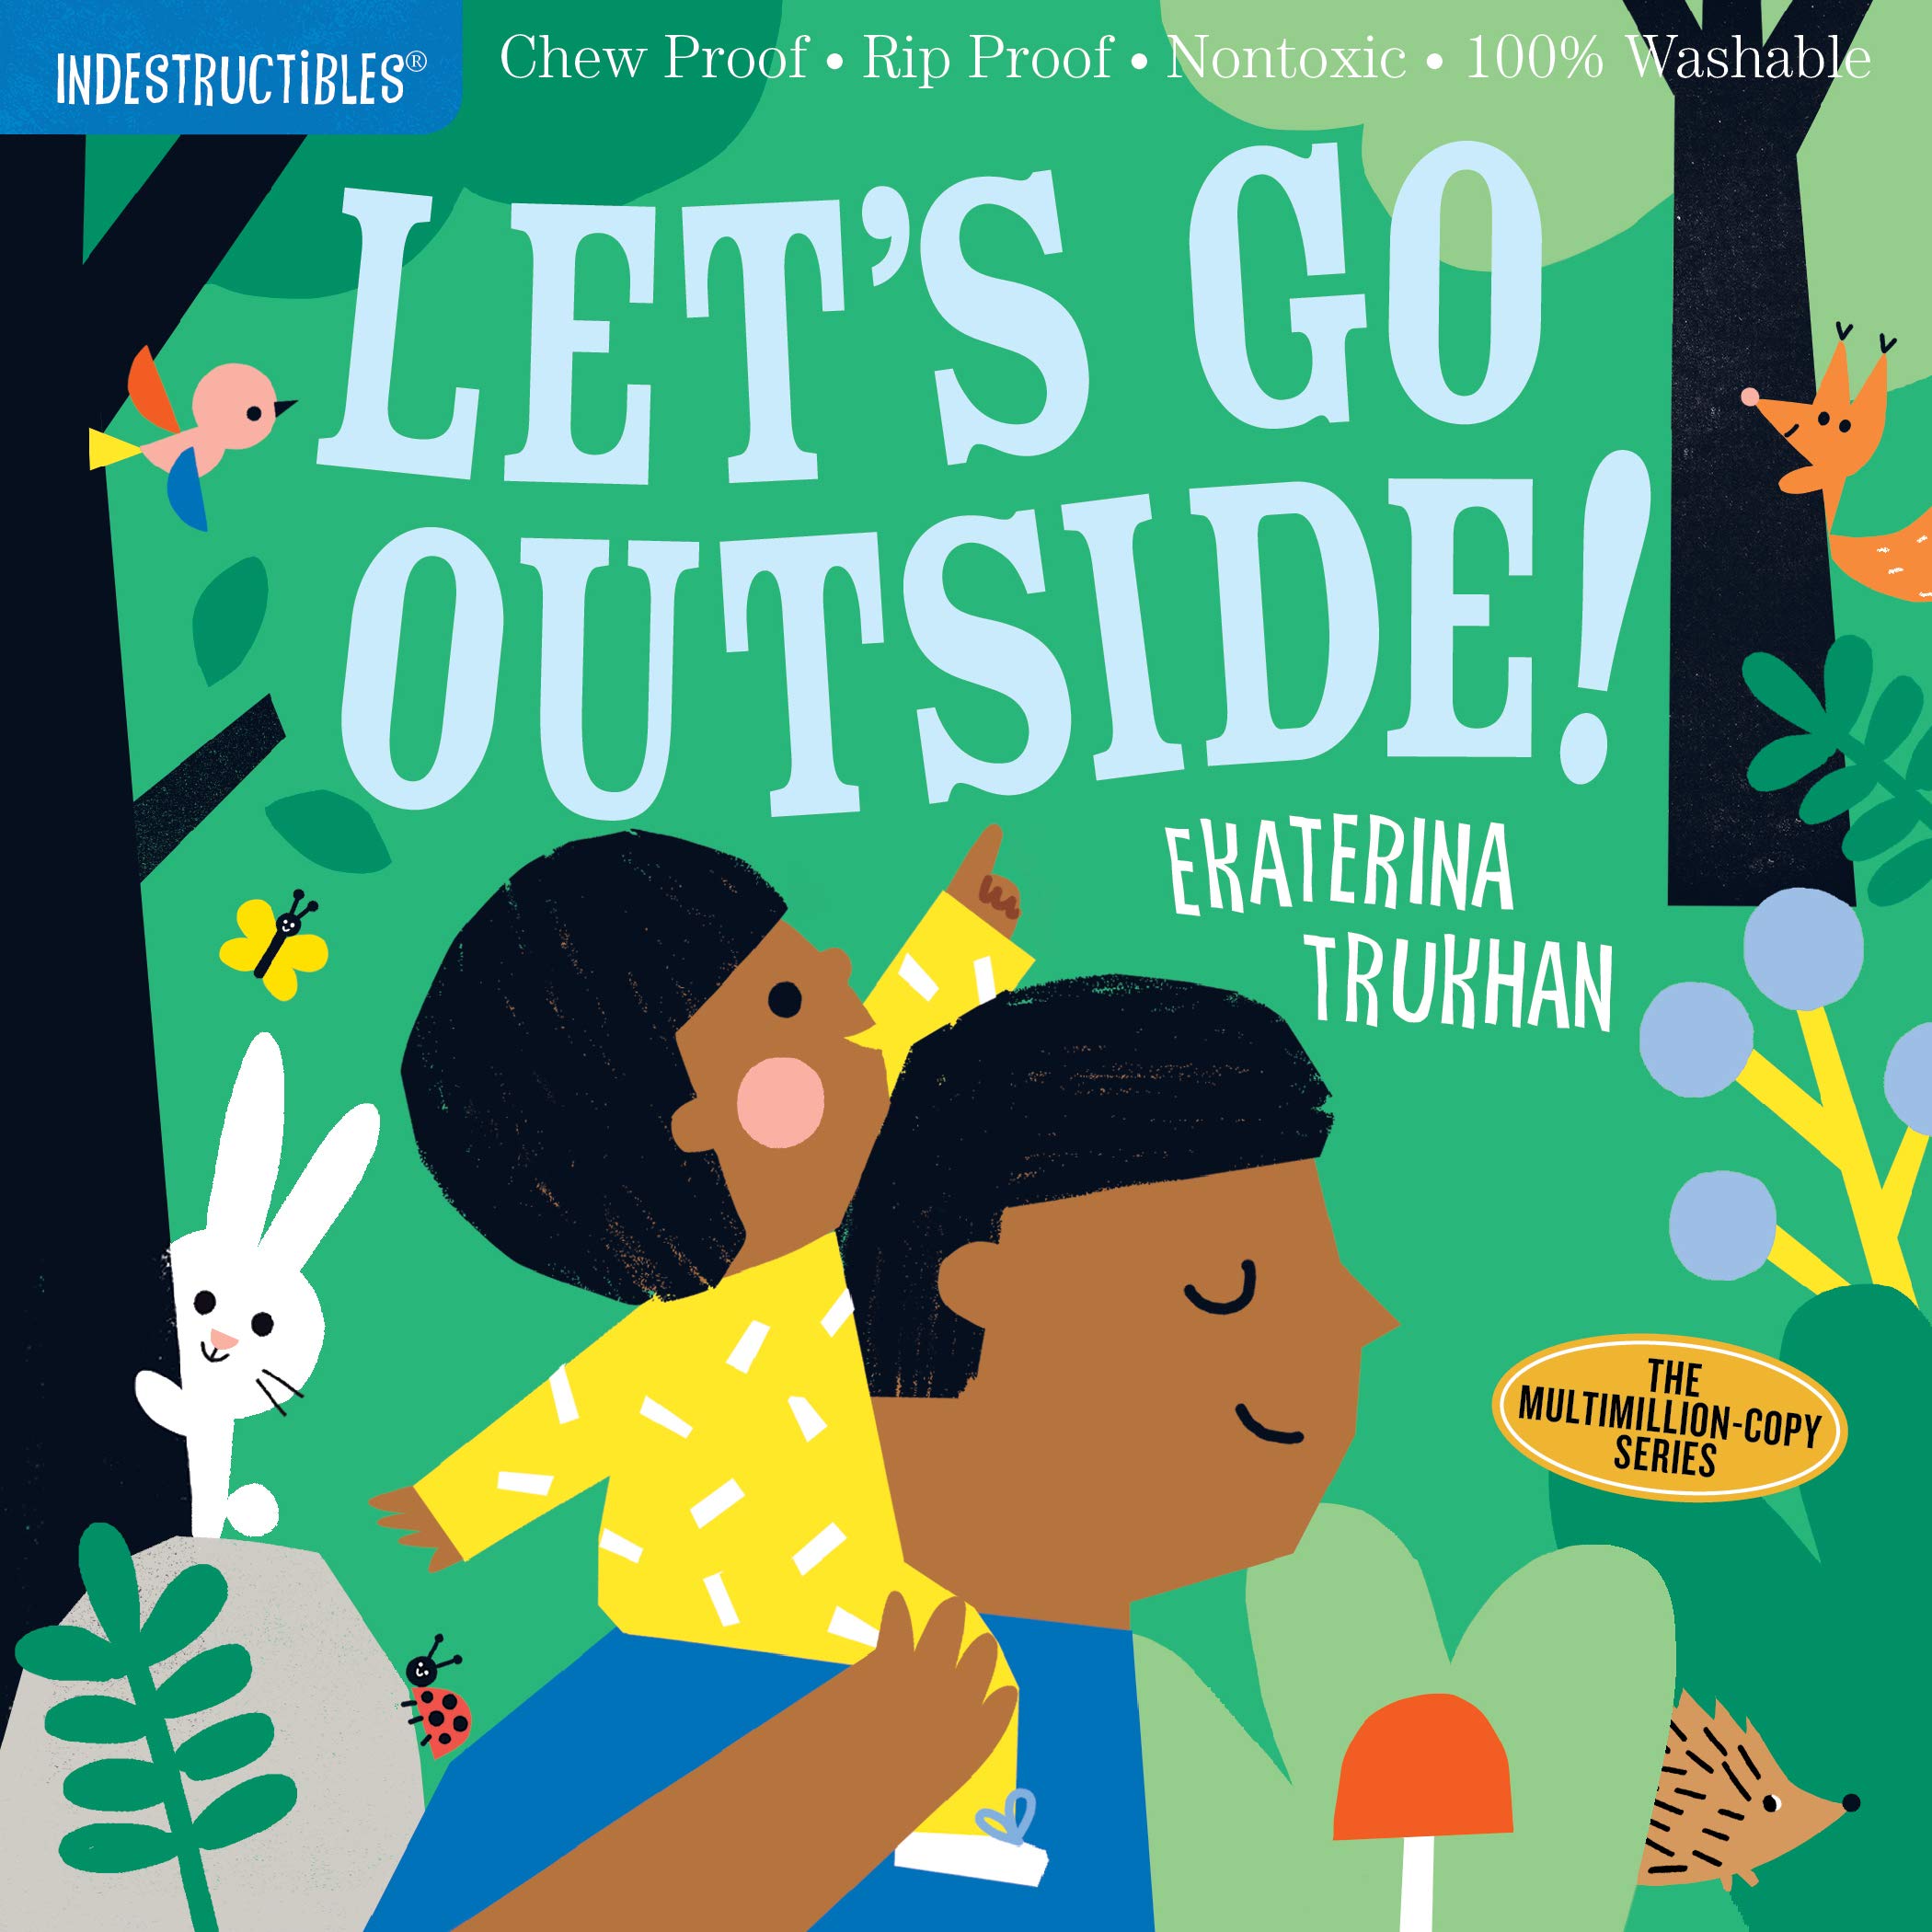 Indestructibles: Let's Go Outside! (Chew Proof - Rip Proof - Nontoxic - 100% Washable Book for Babies)